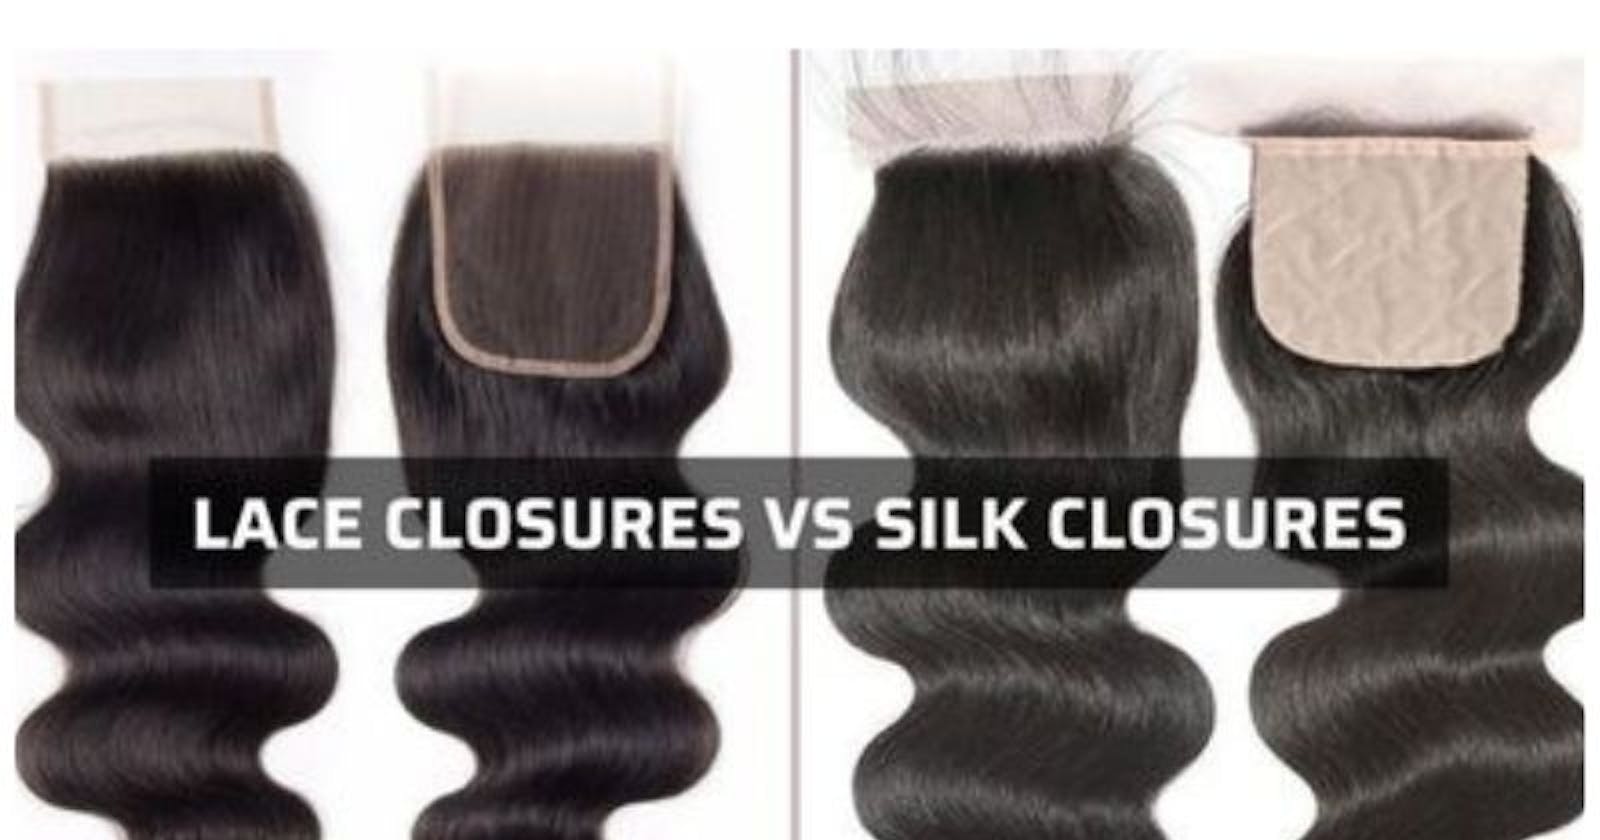 Lace Closures vs Silk Closures: Which One is Better for Your Hair?